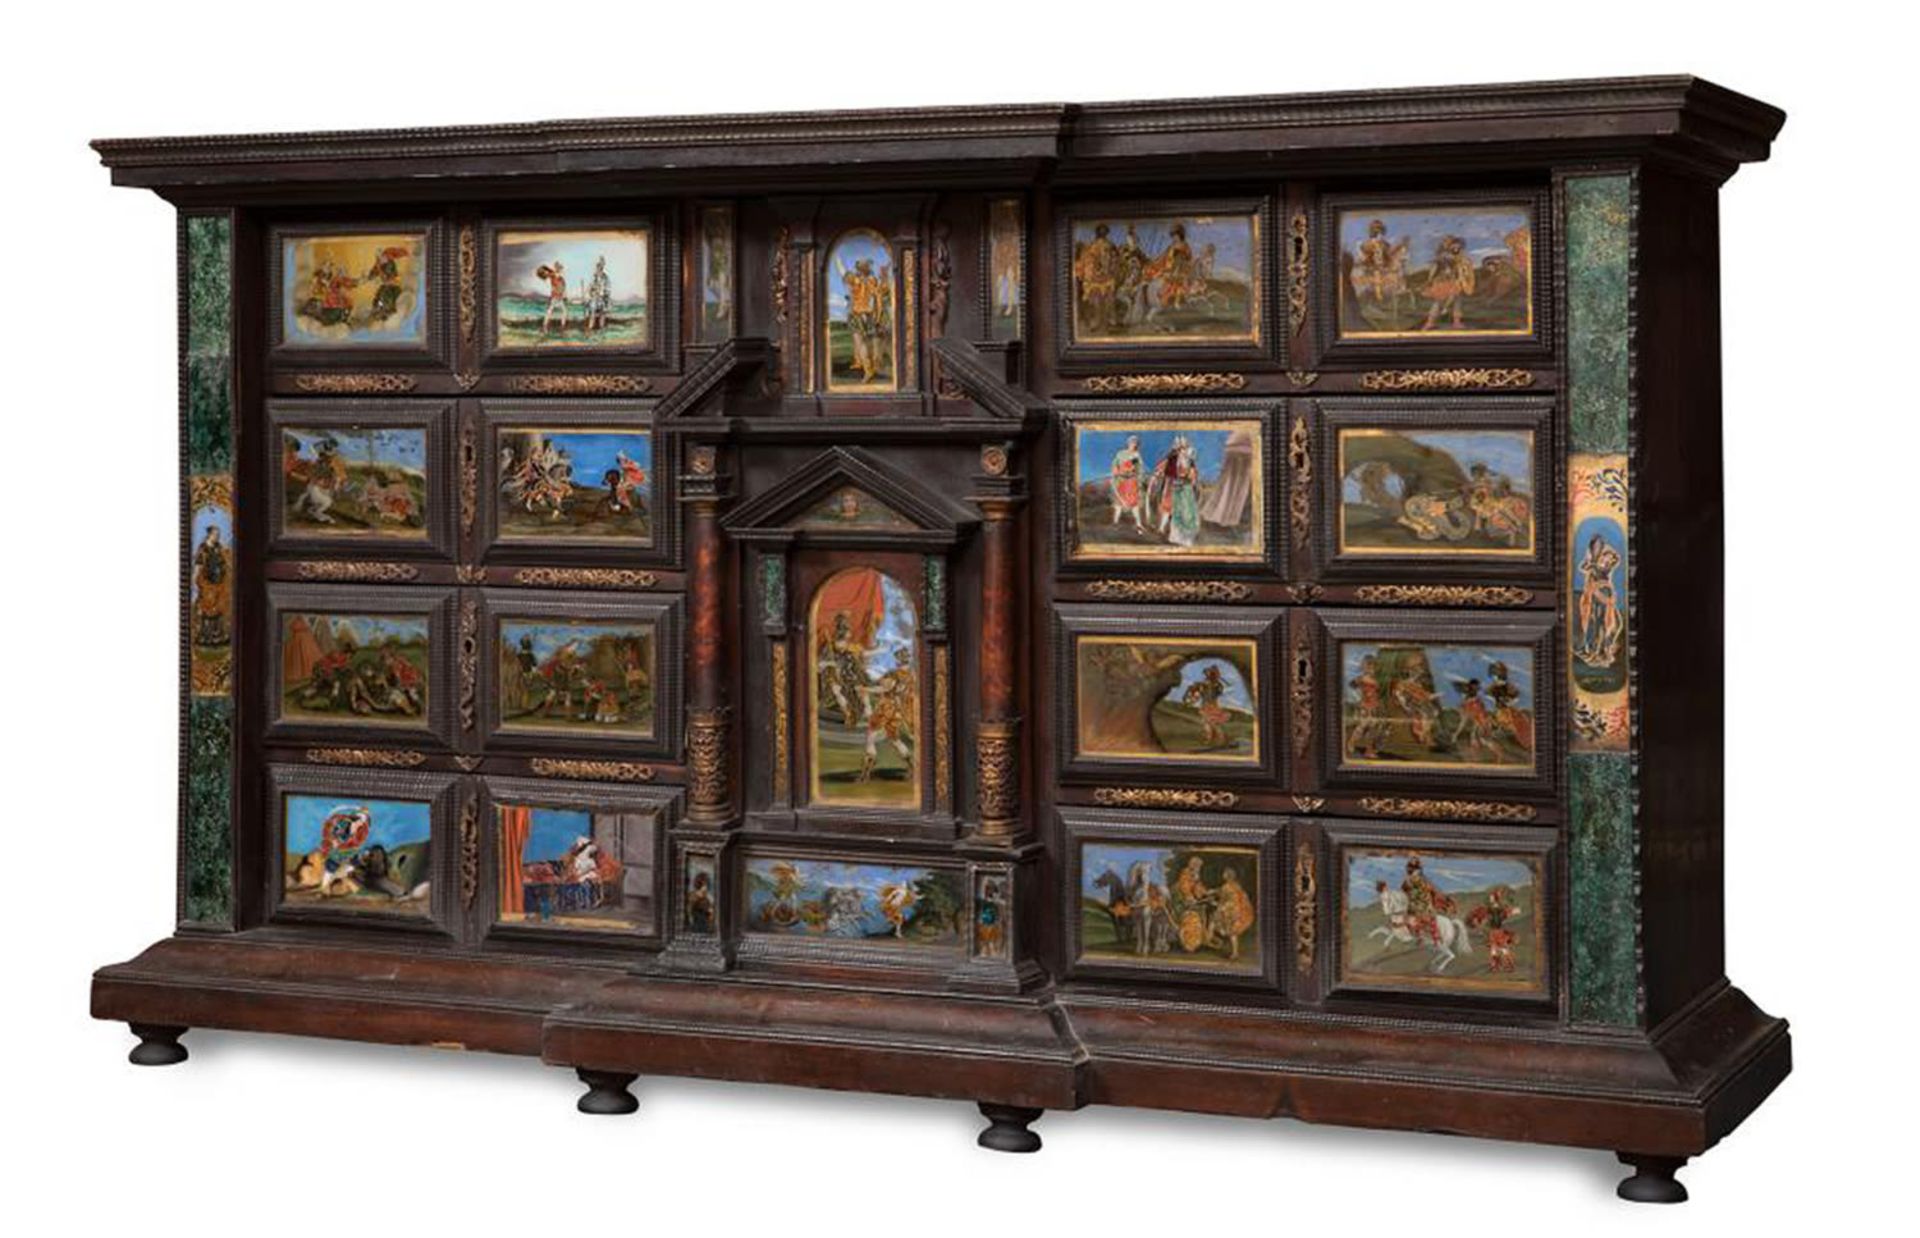 Important Neapolitan Cabinet in rosewood marquetry, tortoiseshell and painted glass, Italian school  - Image 2 of 9